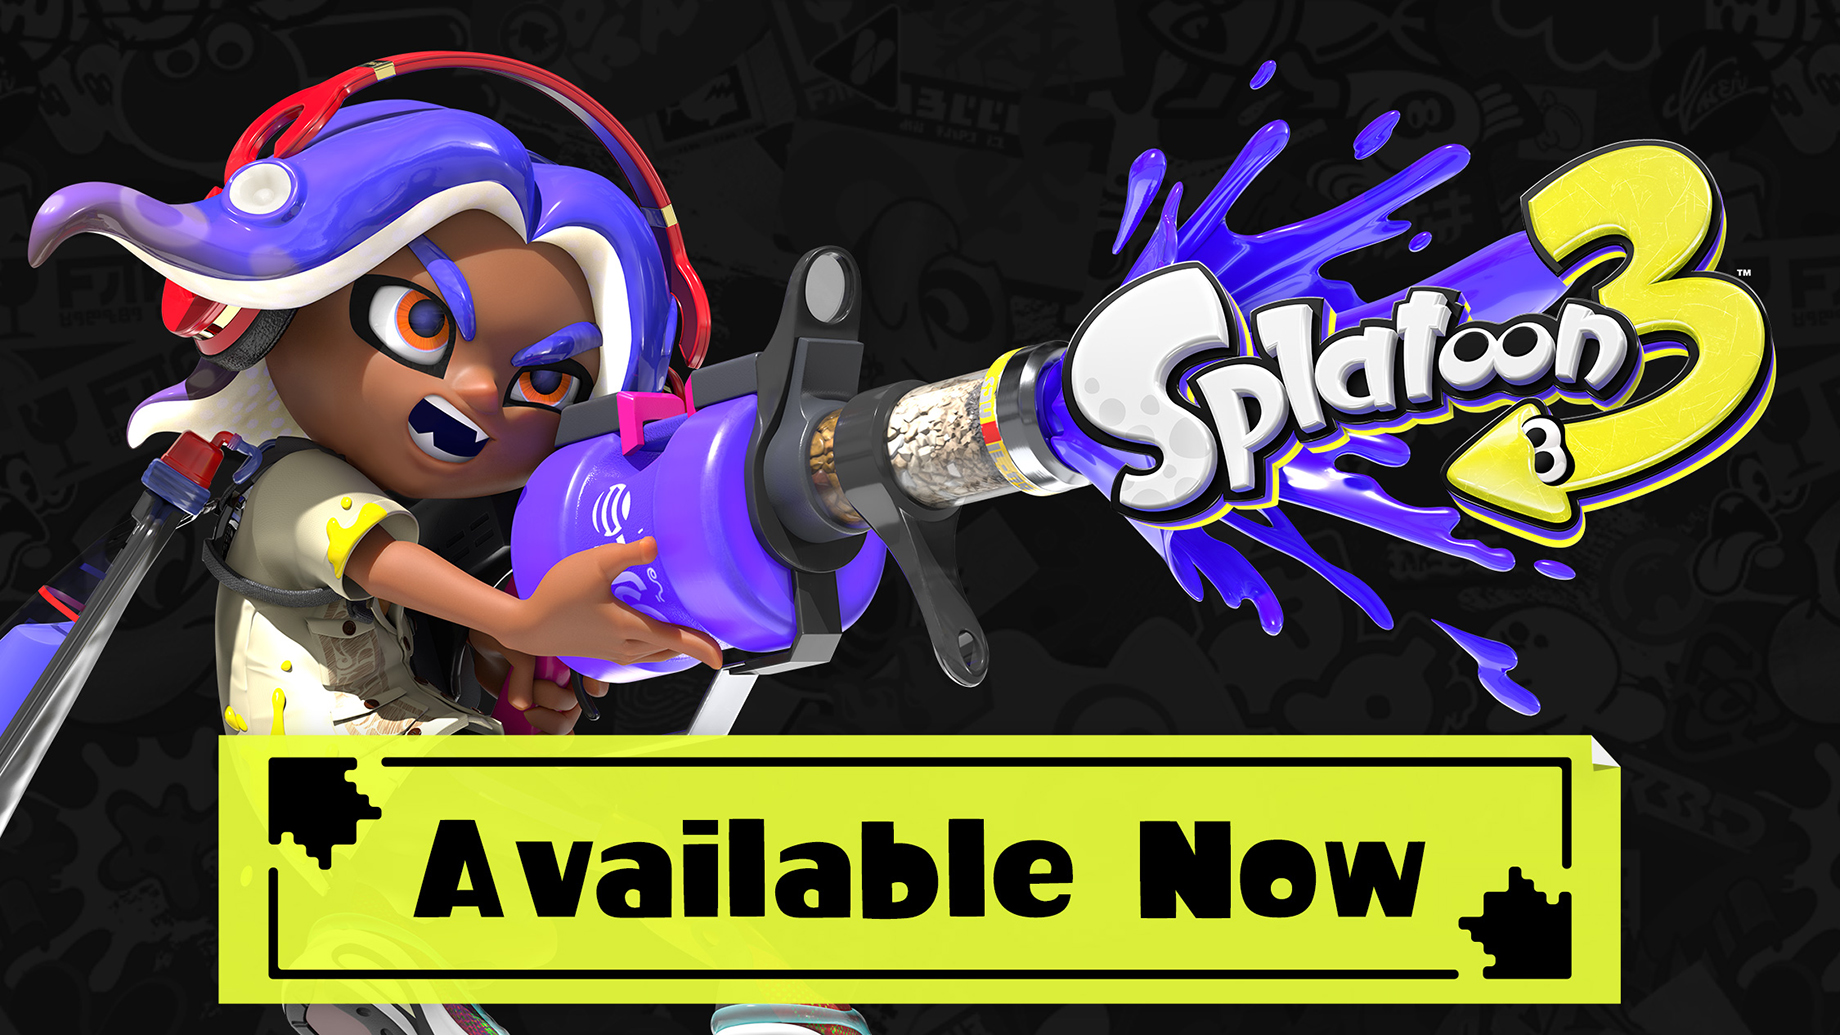 Fast, fun, and frant-ink action awaits in Splatoon 3, available now